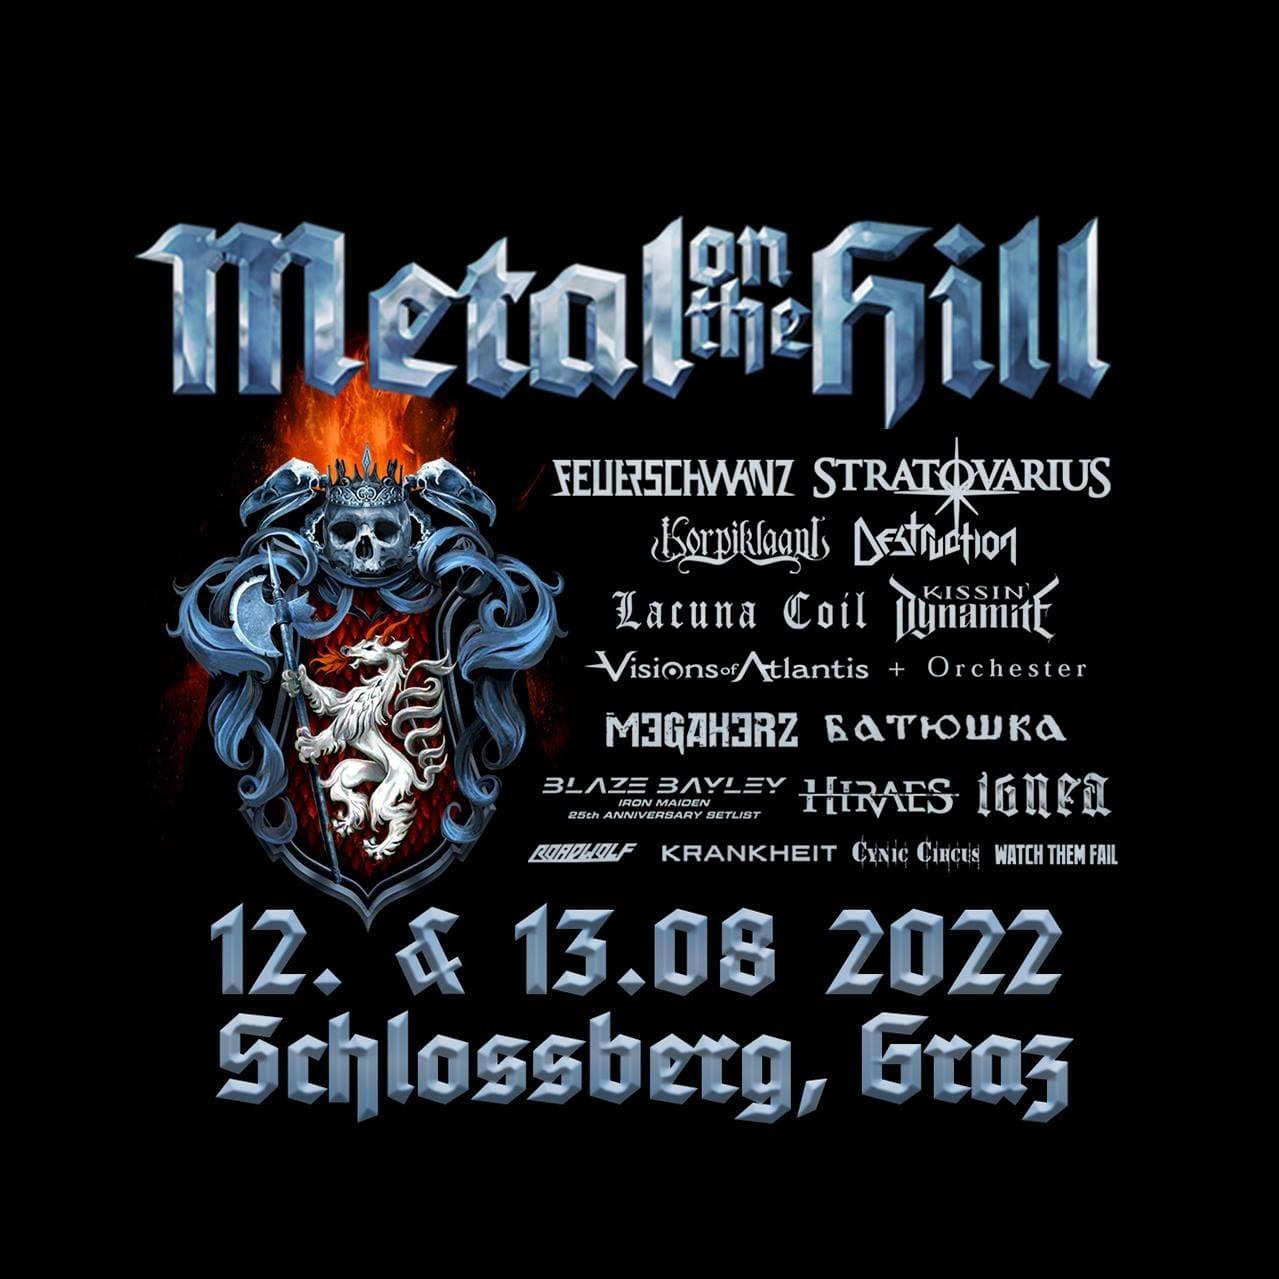 Flyer vom Metal on the Hill 2022